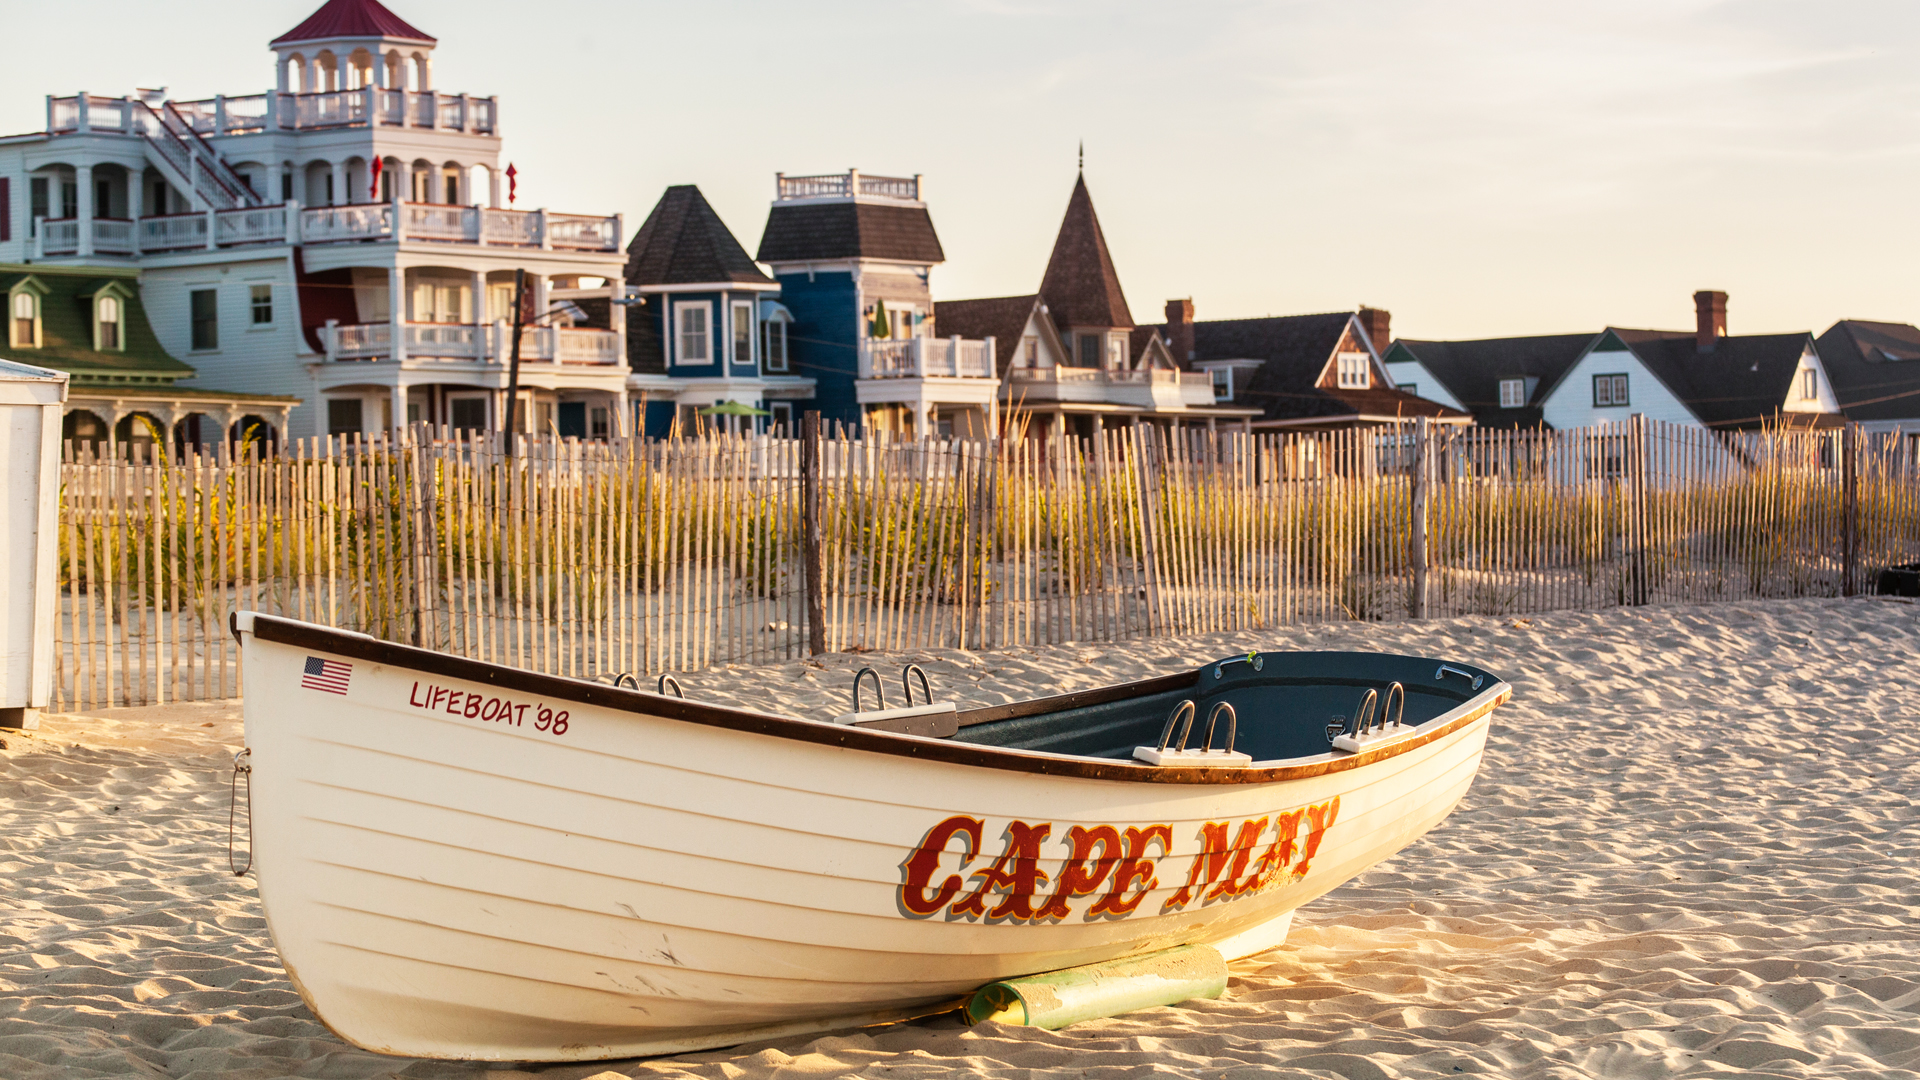 Step into a Postcard: Explore America’s Oldest Seaside Resort with Victorian Houses and Pristine Beaches